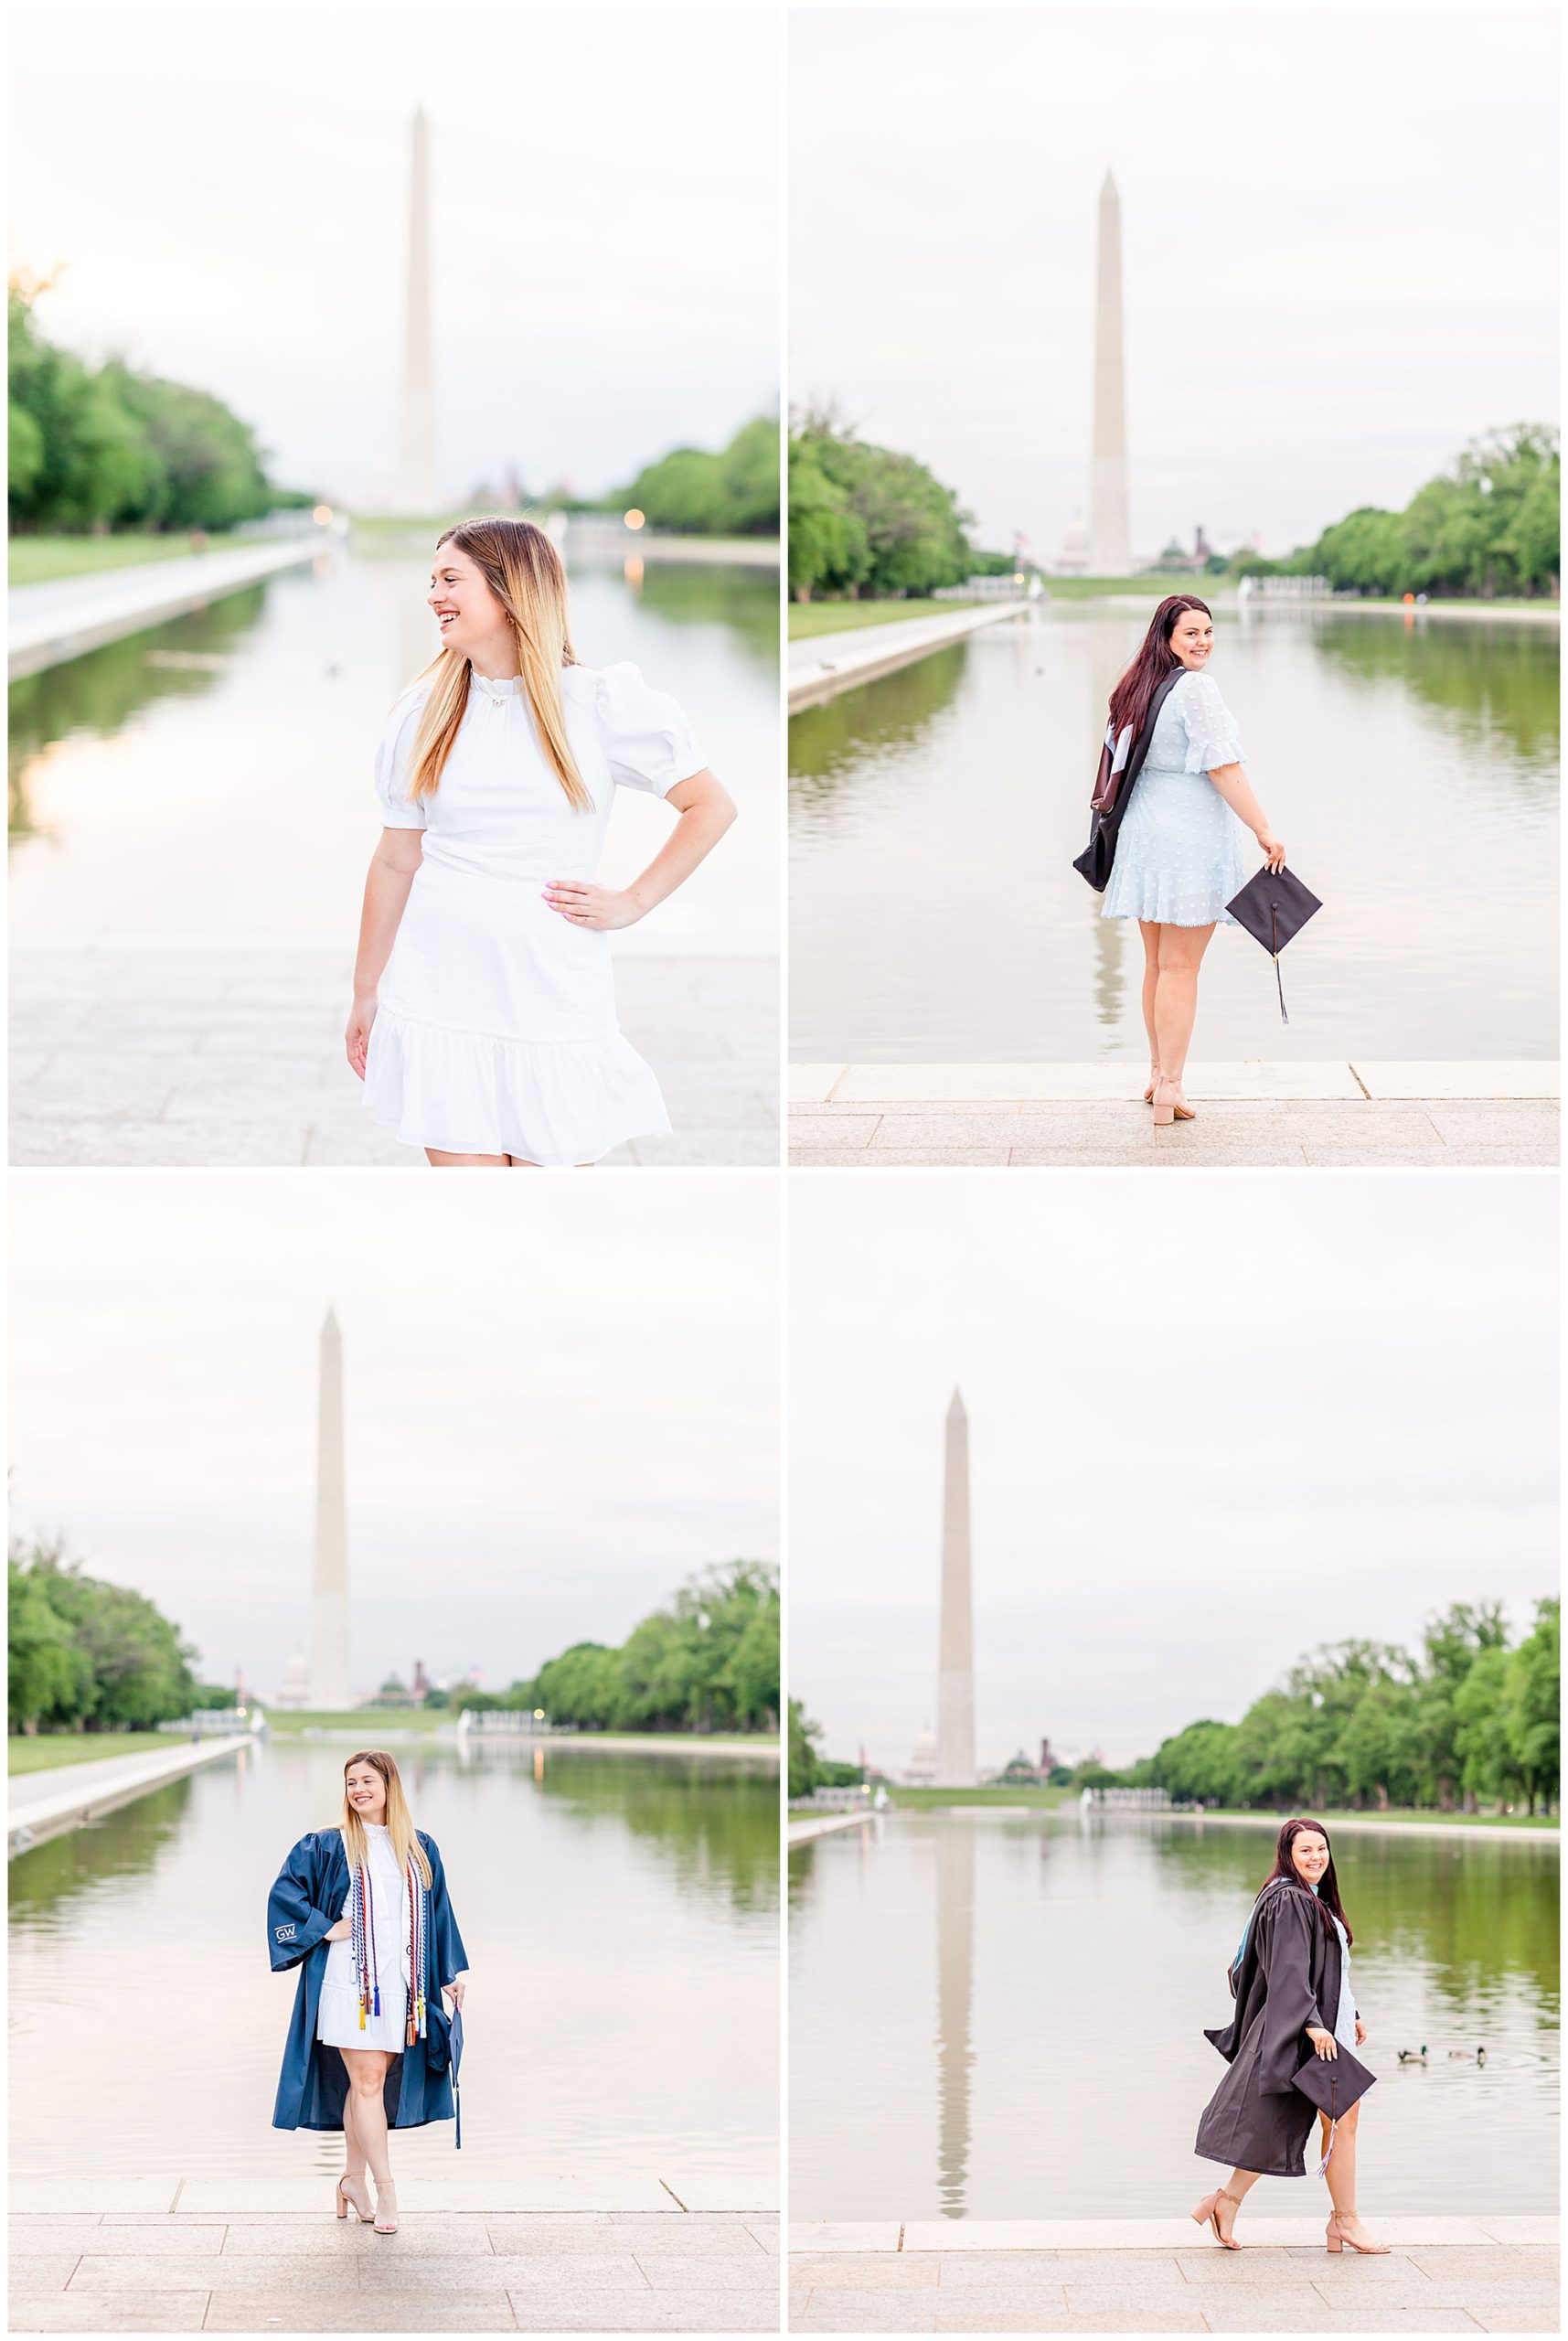 sister graduation photo session, Lincoln Memorial graduation photos, sibling graduation photos, magic hour graduation photos, Washington D.C. graduation photos, D.C graduates, Rachel E.H. Photographer, D.C. graduation photographer, dirty blonde woman, woman with hand on hip, white graduation dress, woman holding graduation cap, woman looking into reflecting pool